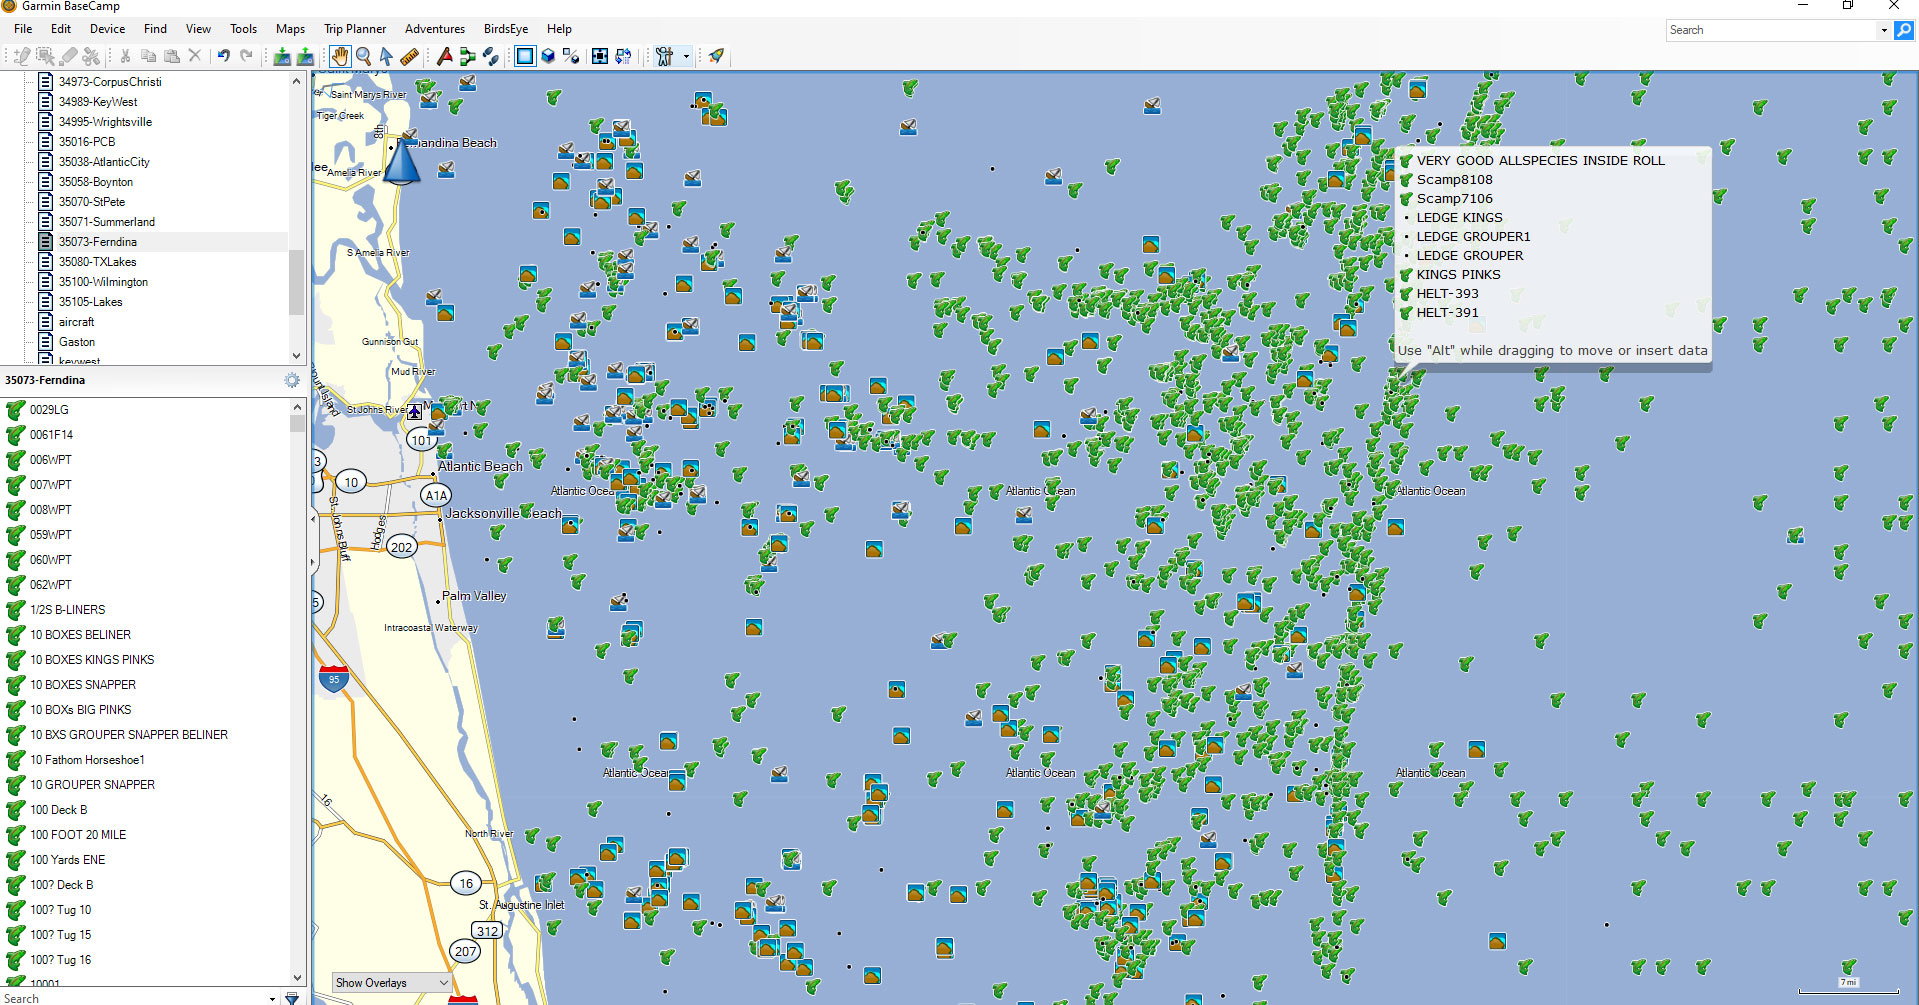 Custom SD Card of Fishing Spots for your GPS Unit - Page 13 - The Hull Truth  - Boating and Fishing Forum